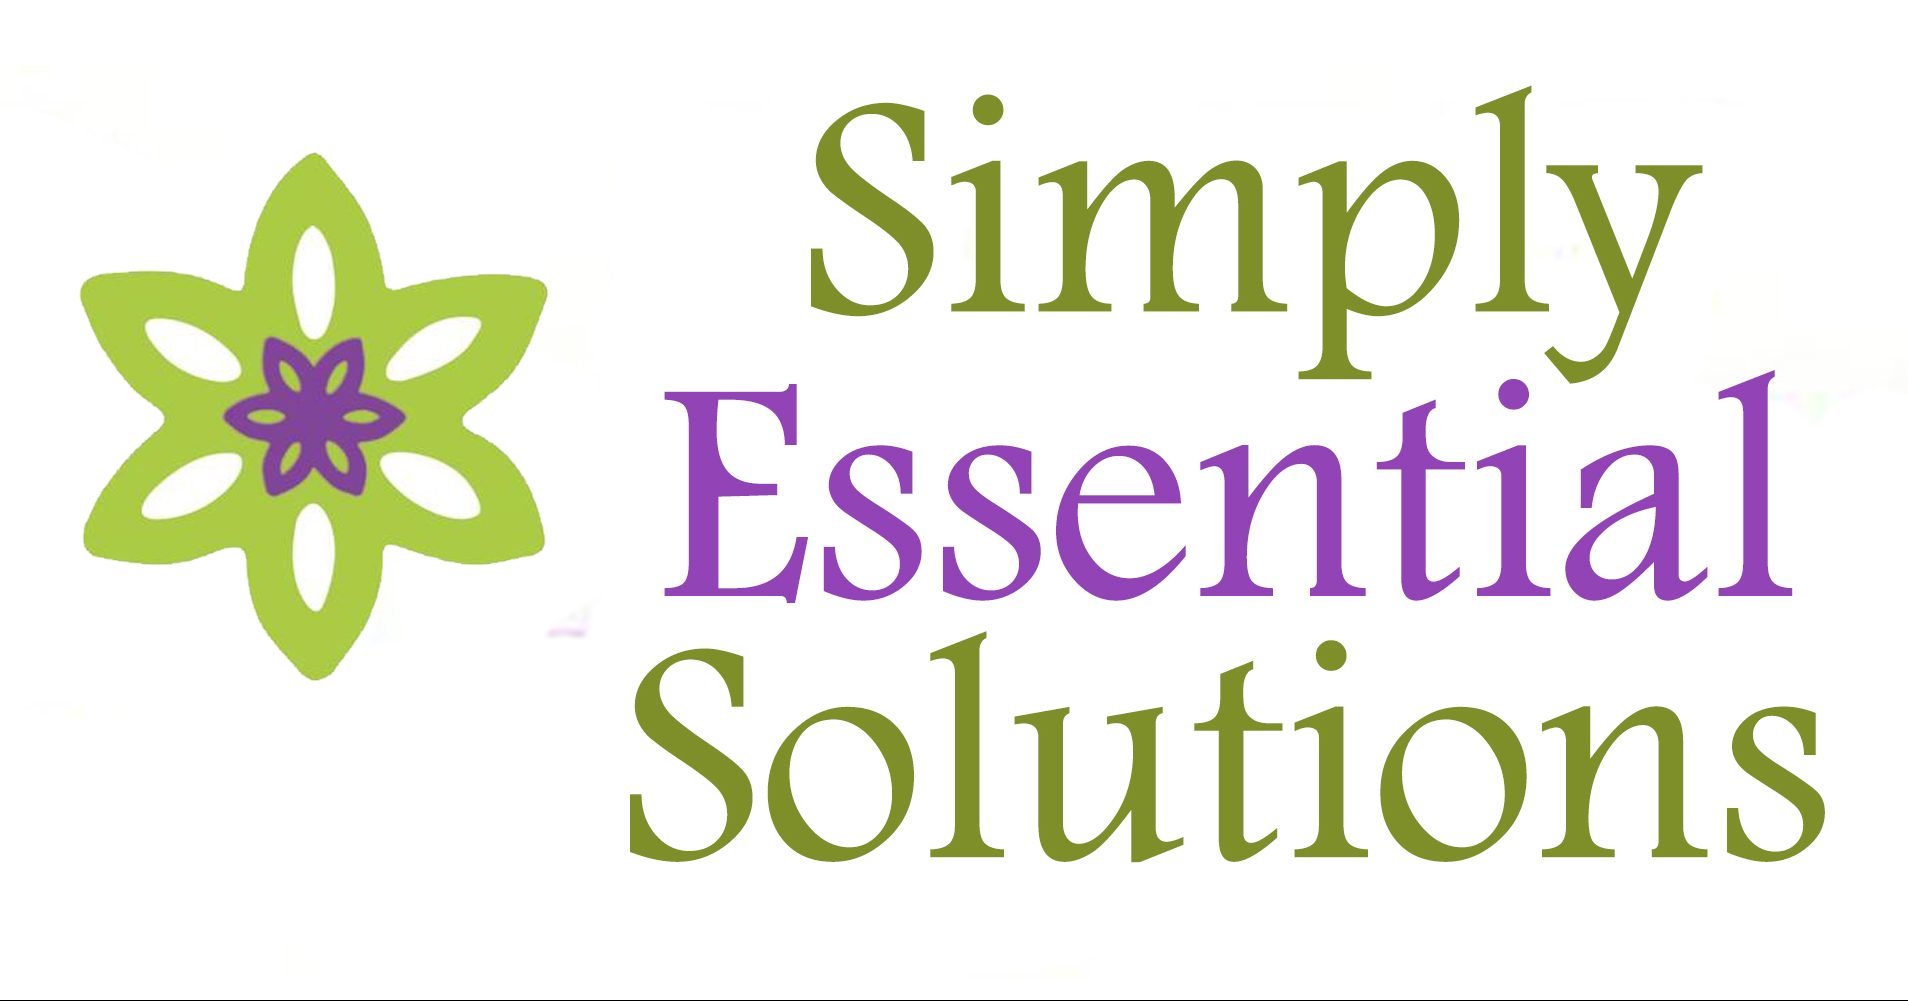 Simply Essential Solutions Label Smaller AboveCloser In SMALLER 1000 DPI colored flat aliexpress logo e1589902595577